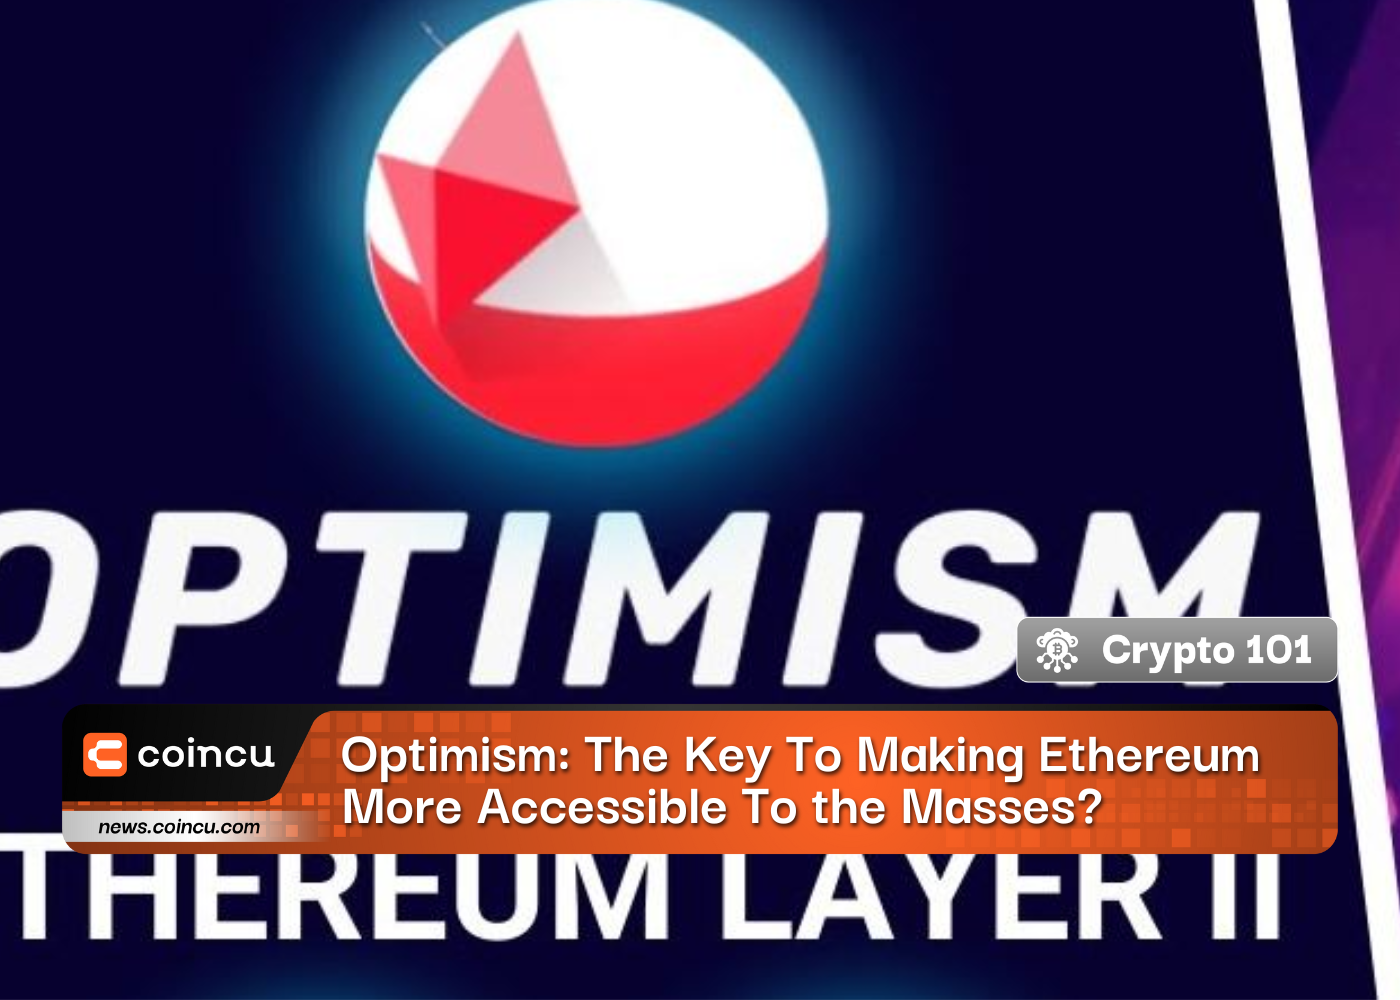 Optimism: The Key To Making Ethereum More Accessible To the Masses?